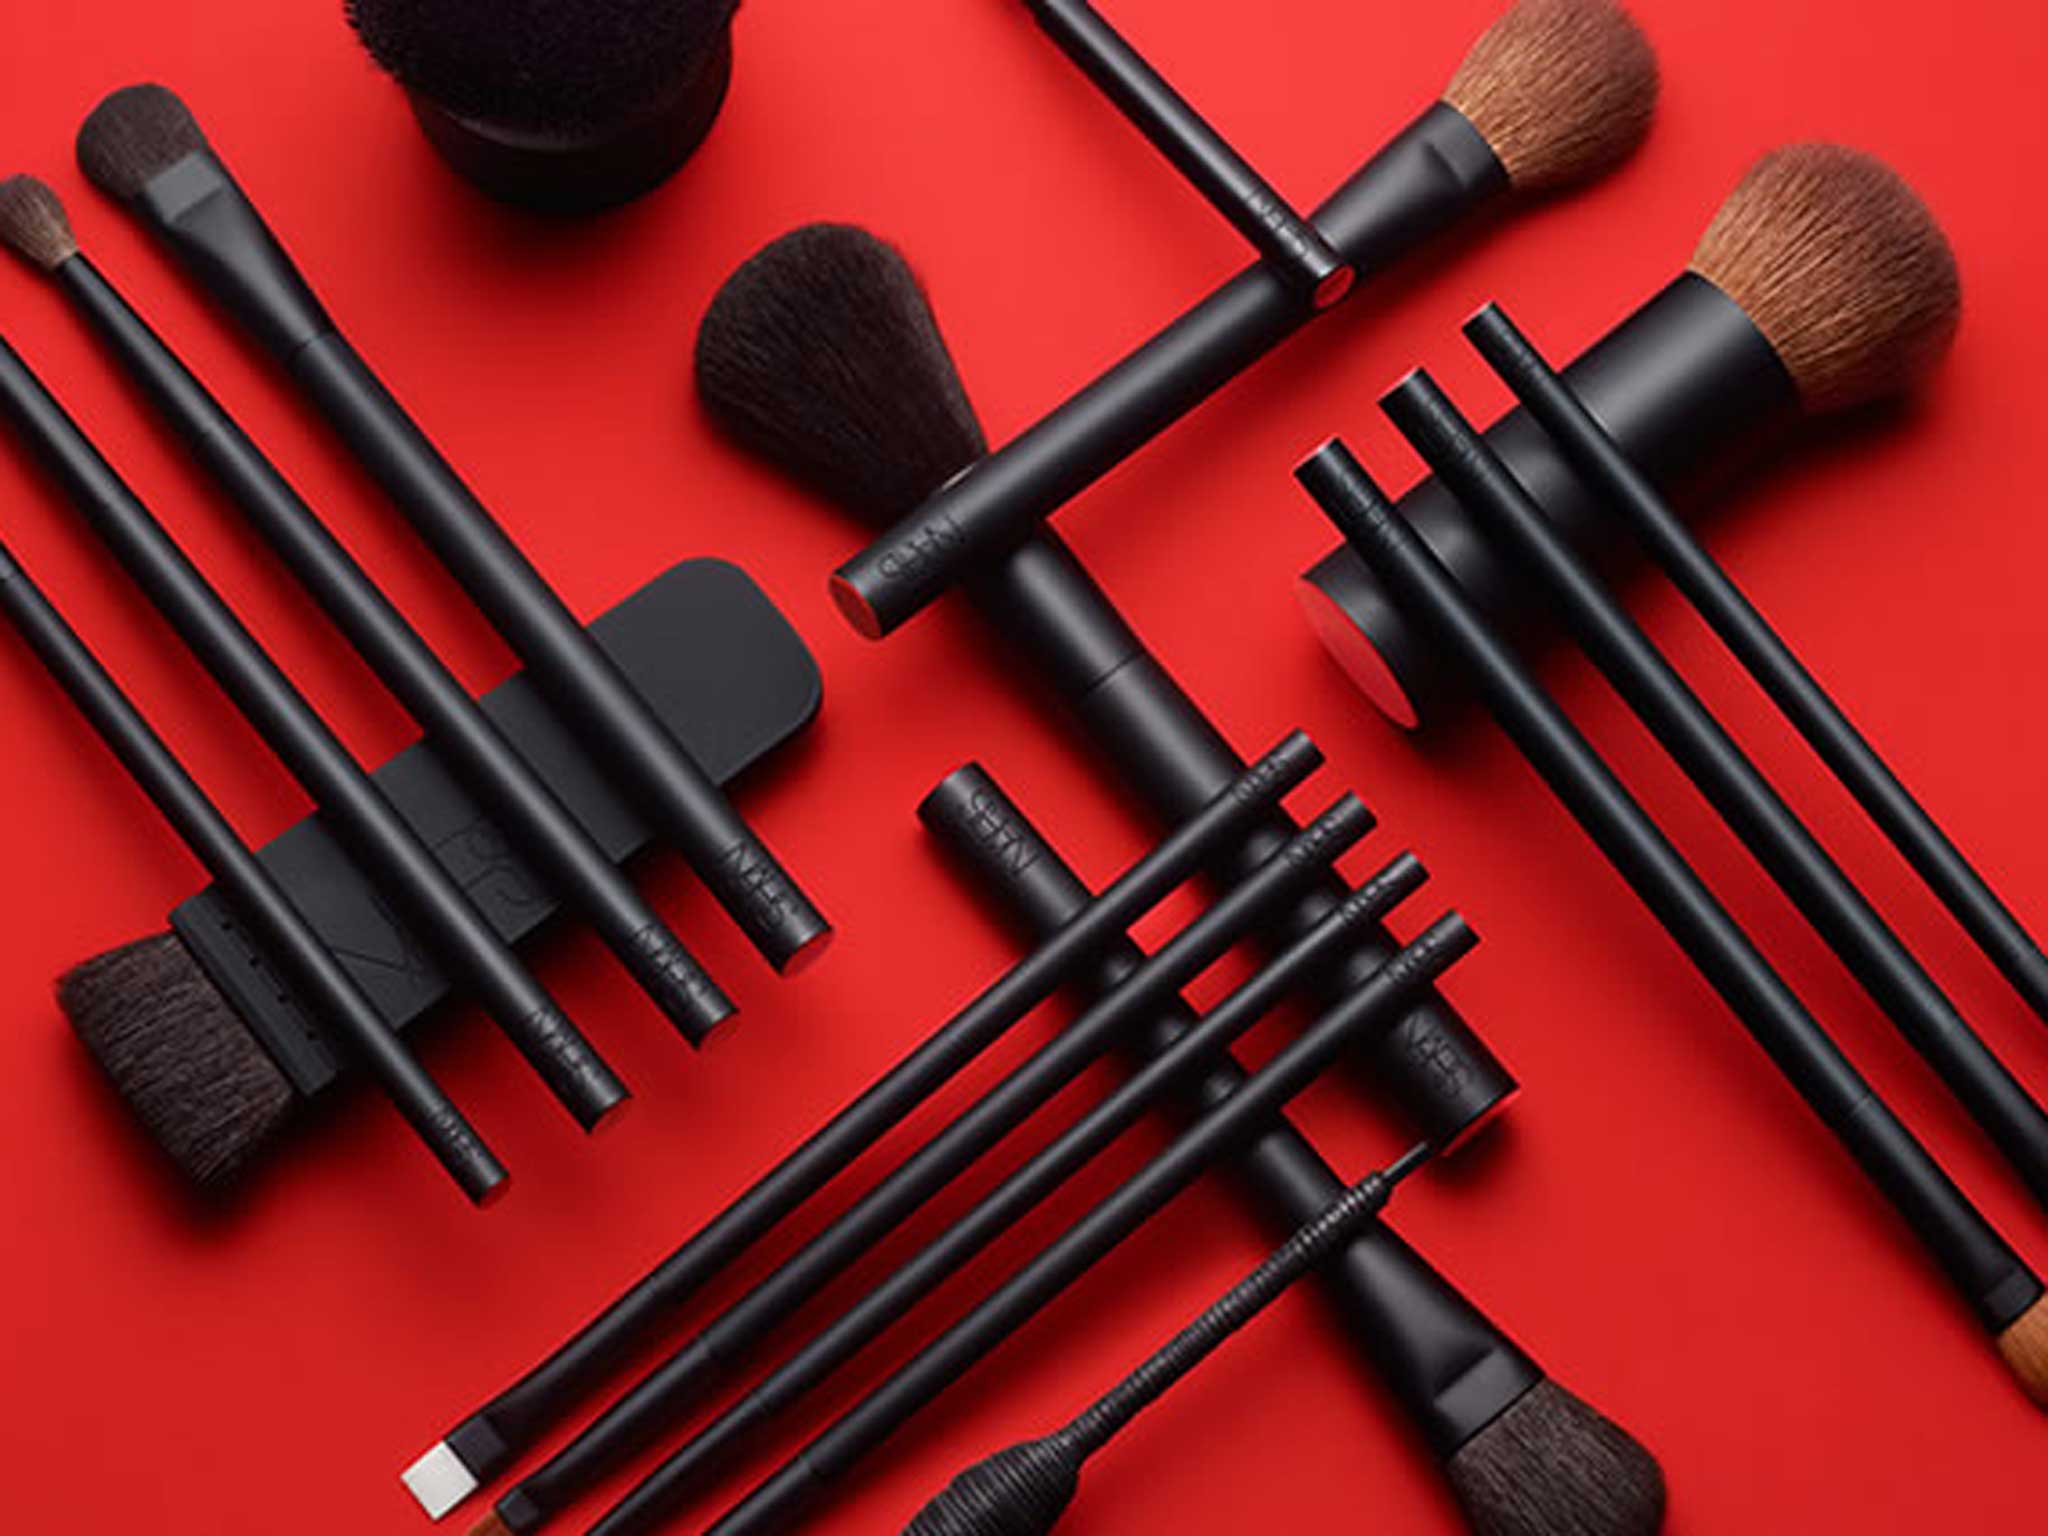 11 best make-up brushes | The Independent